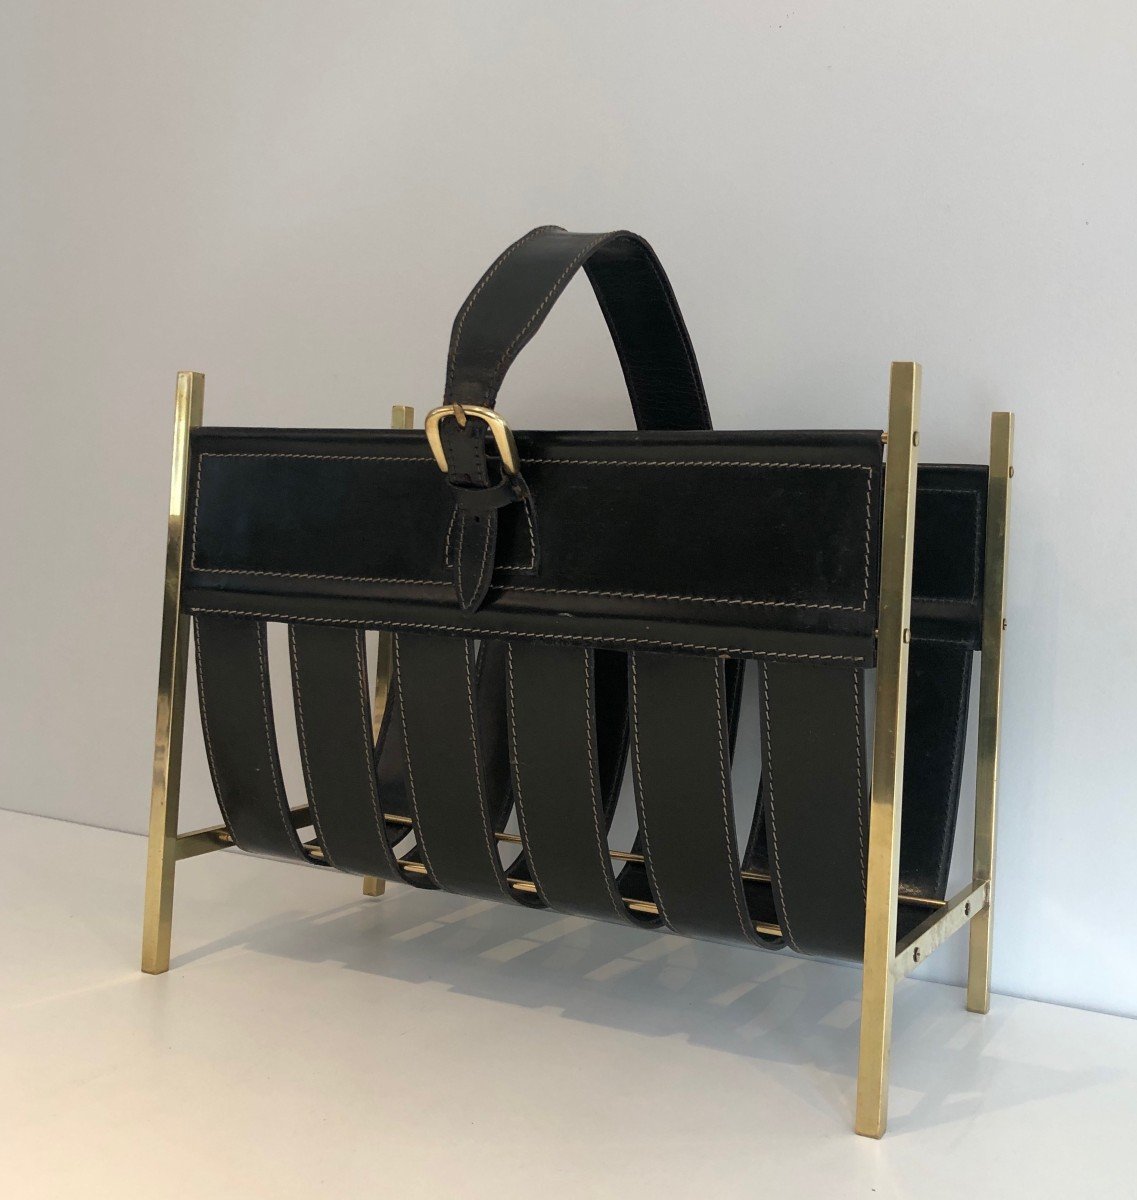 Hand-bag Brass And Leather Magazine Rack By Jacques Adnet. Circa 1940